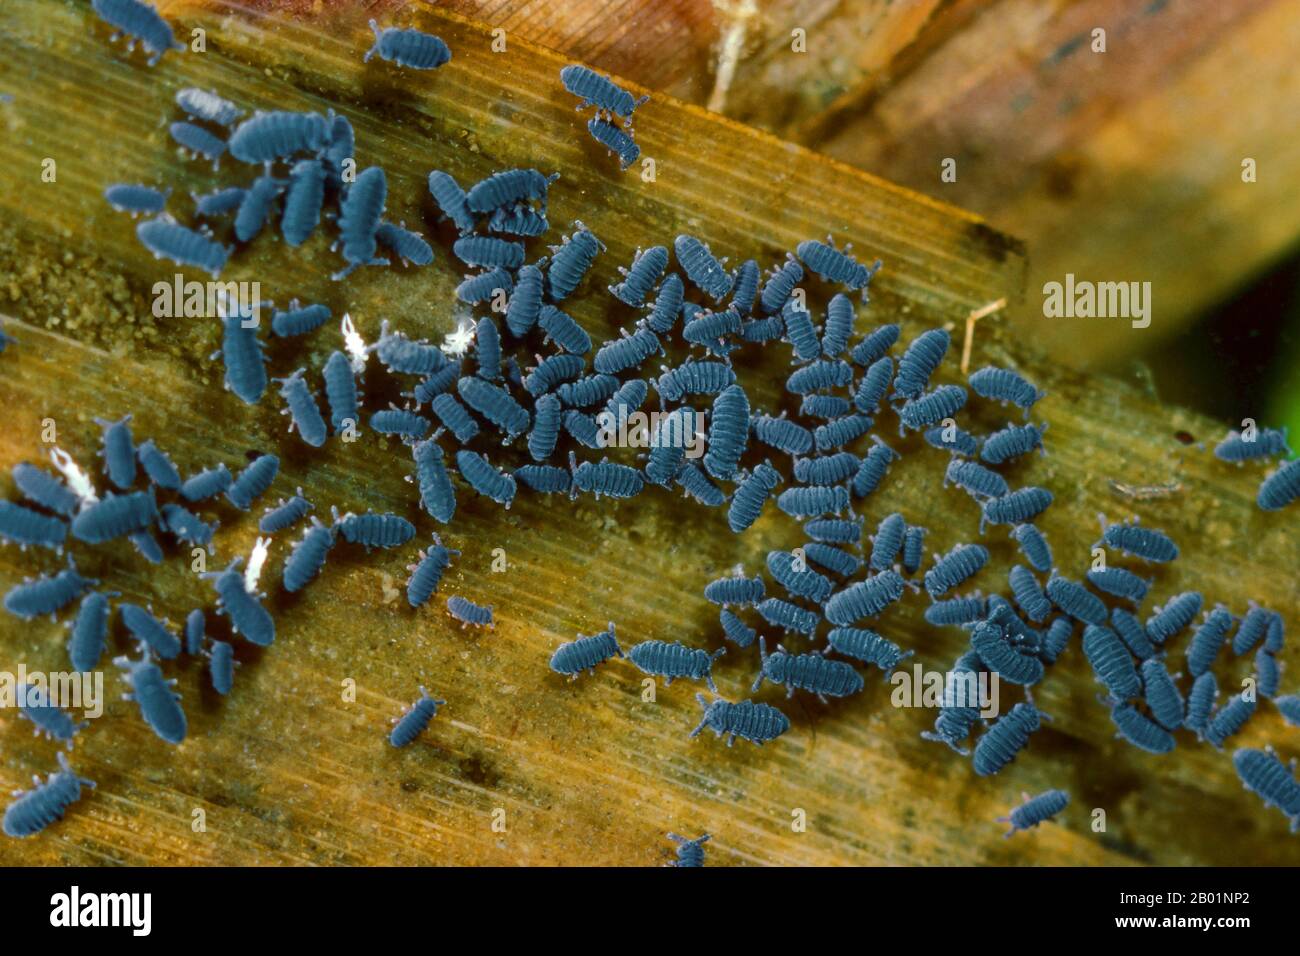 water springtail (Podura aquatica), many water springtails on a leaf in water, Germany Stock Photo